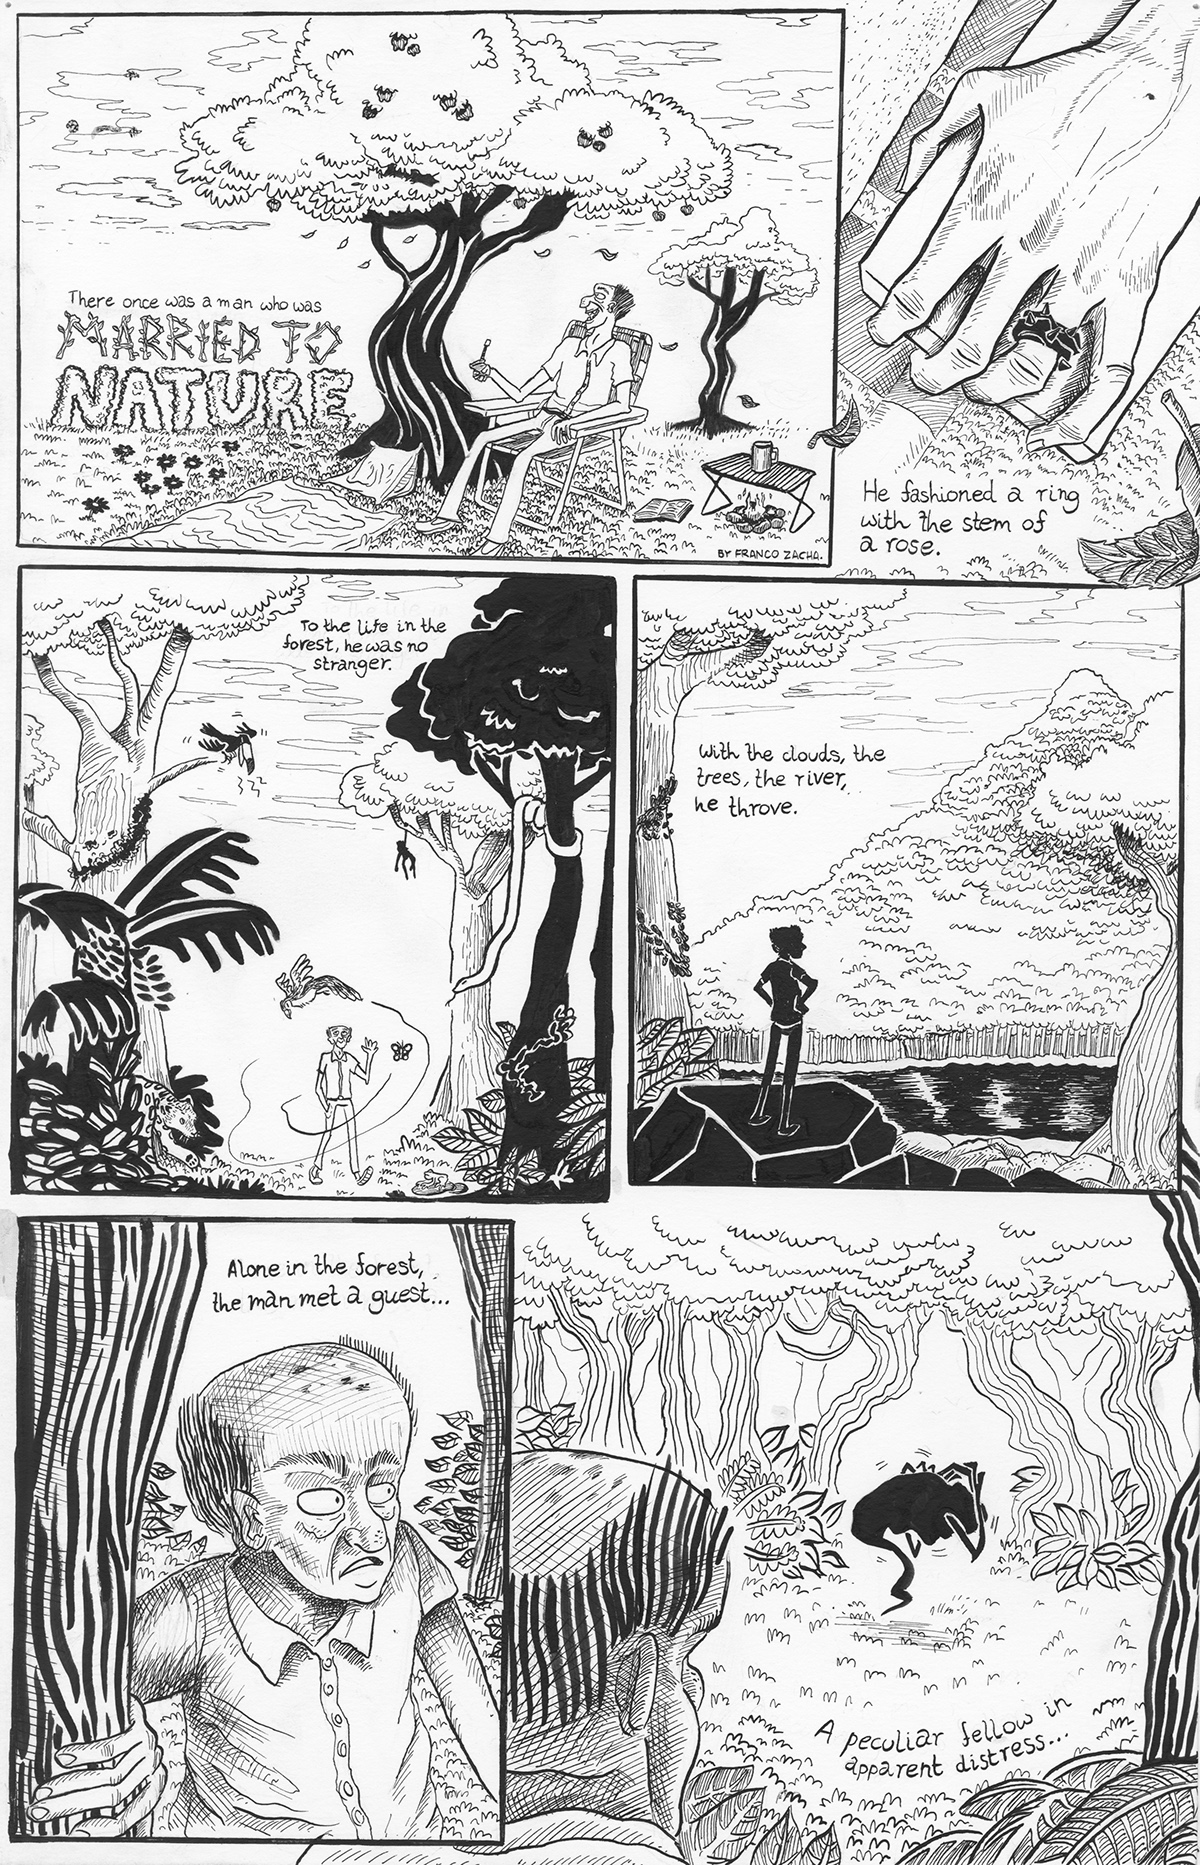 married Nature comics comic ink graphic novel greed environment global warming traditional